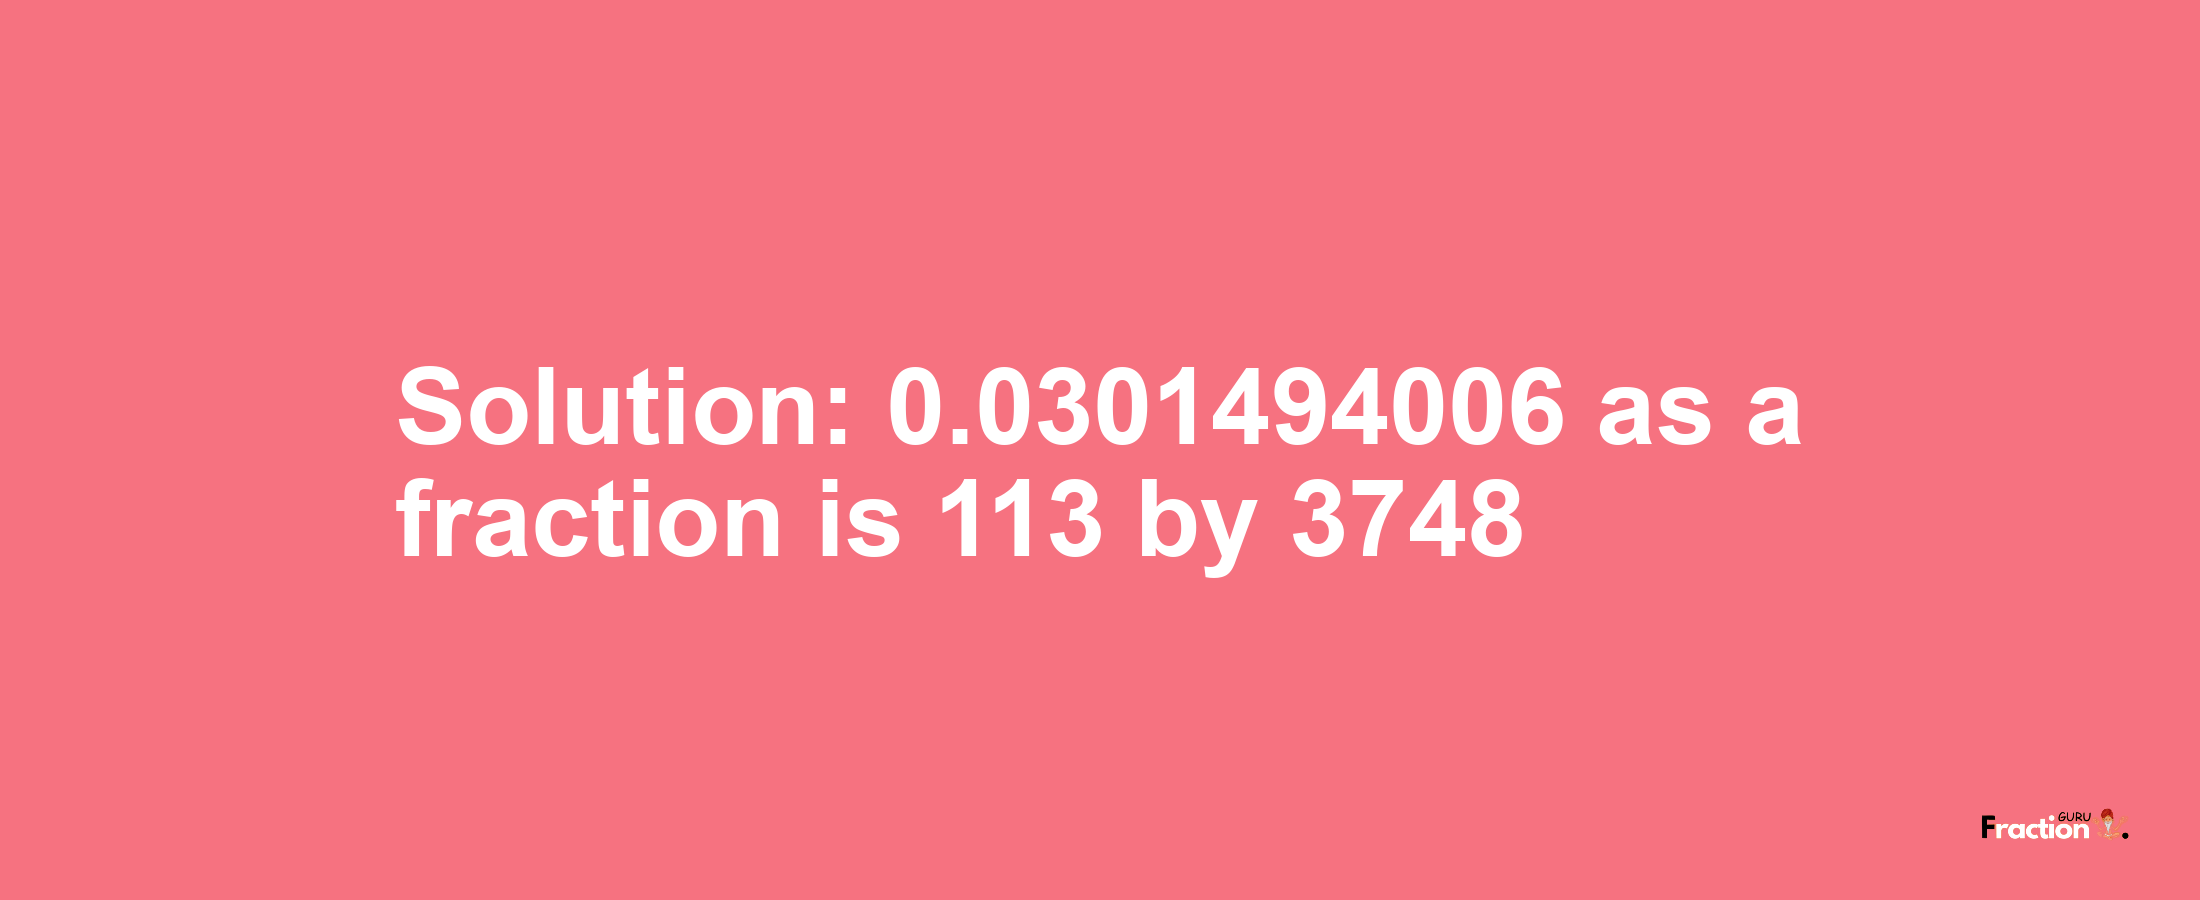 Solution:0.0301494006 as a fraction is 113/3748